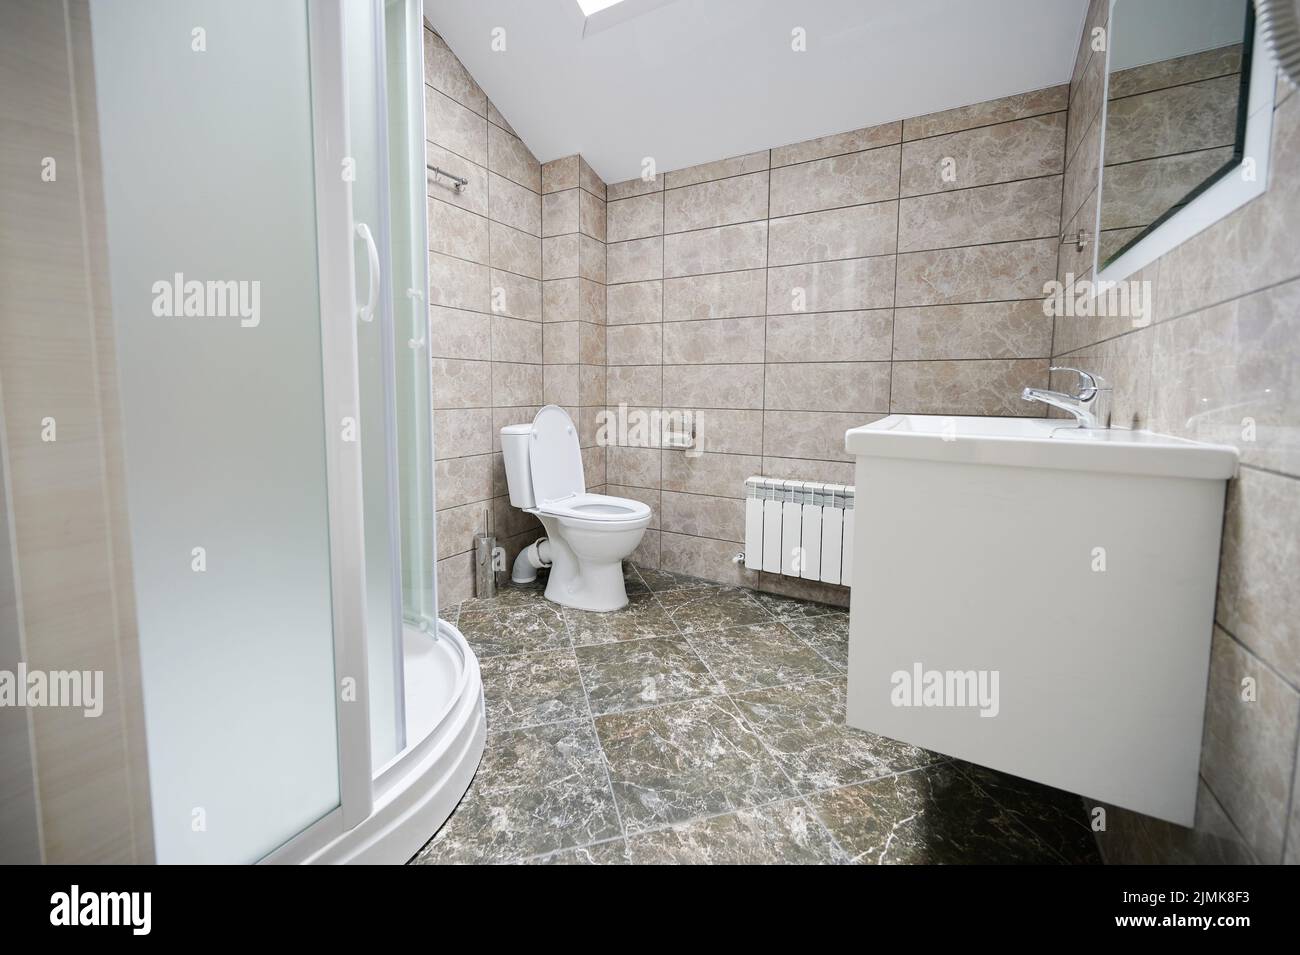 Empty washroom side view with clean marble interior Stock Photo